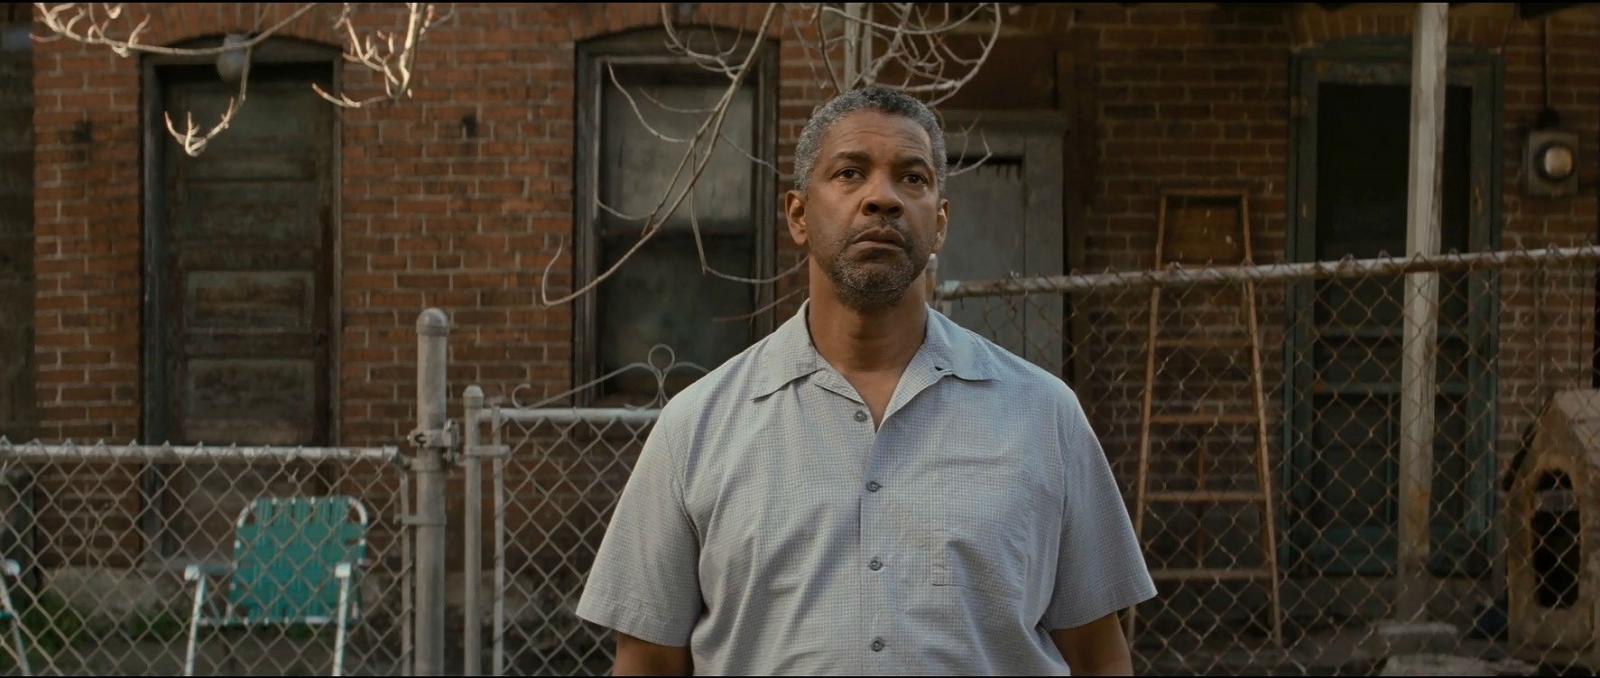 Fences review Denzel Washington is pure powerhouse in one of his most three-dimensional roles IBTimes UK